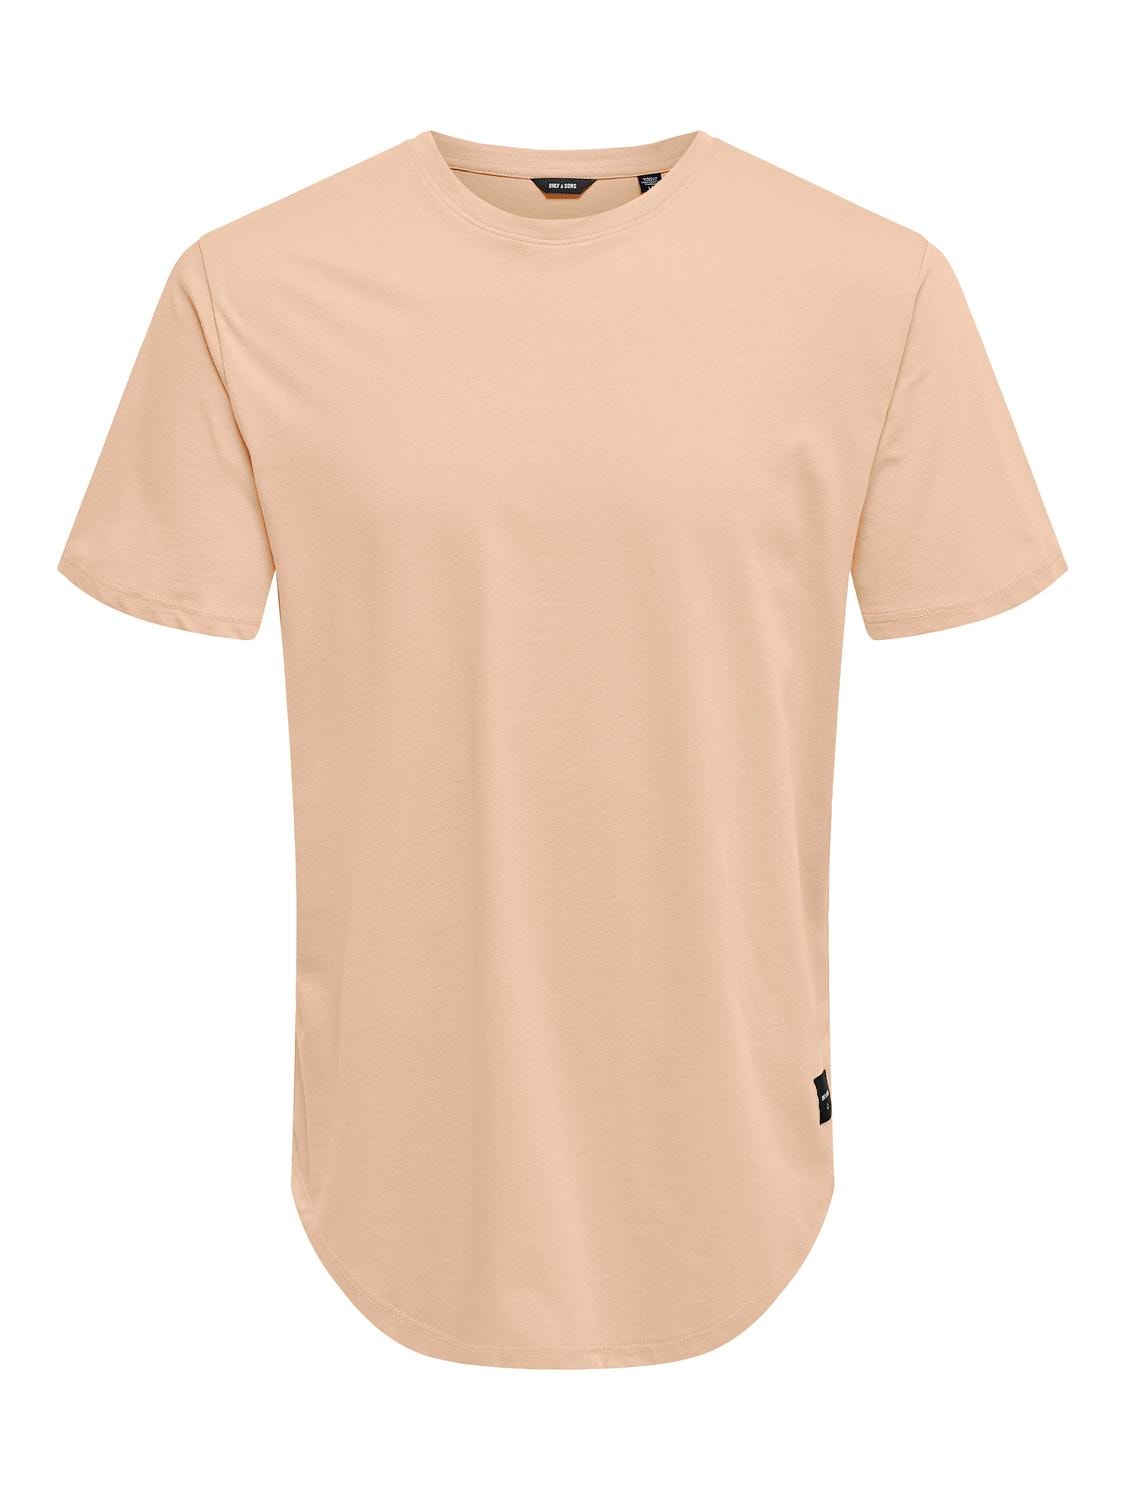 ONLY & SONS Long Line Fit O-hals T-skjorte -Peach Nectar - 22002973